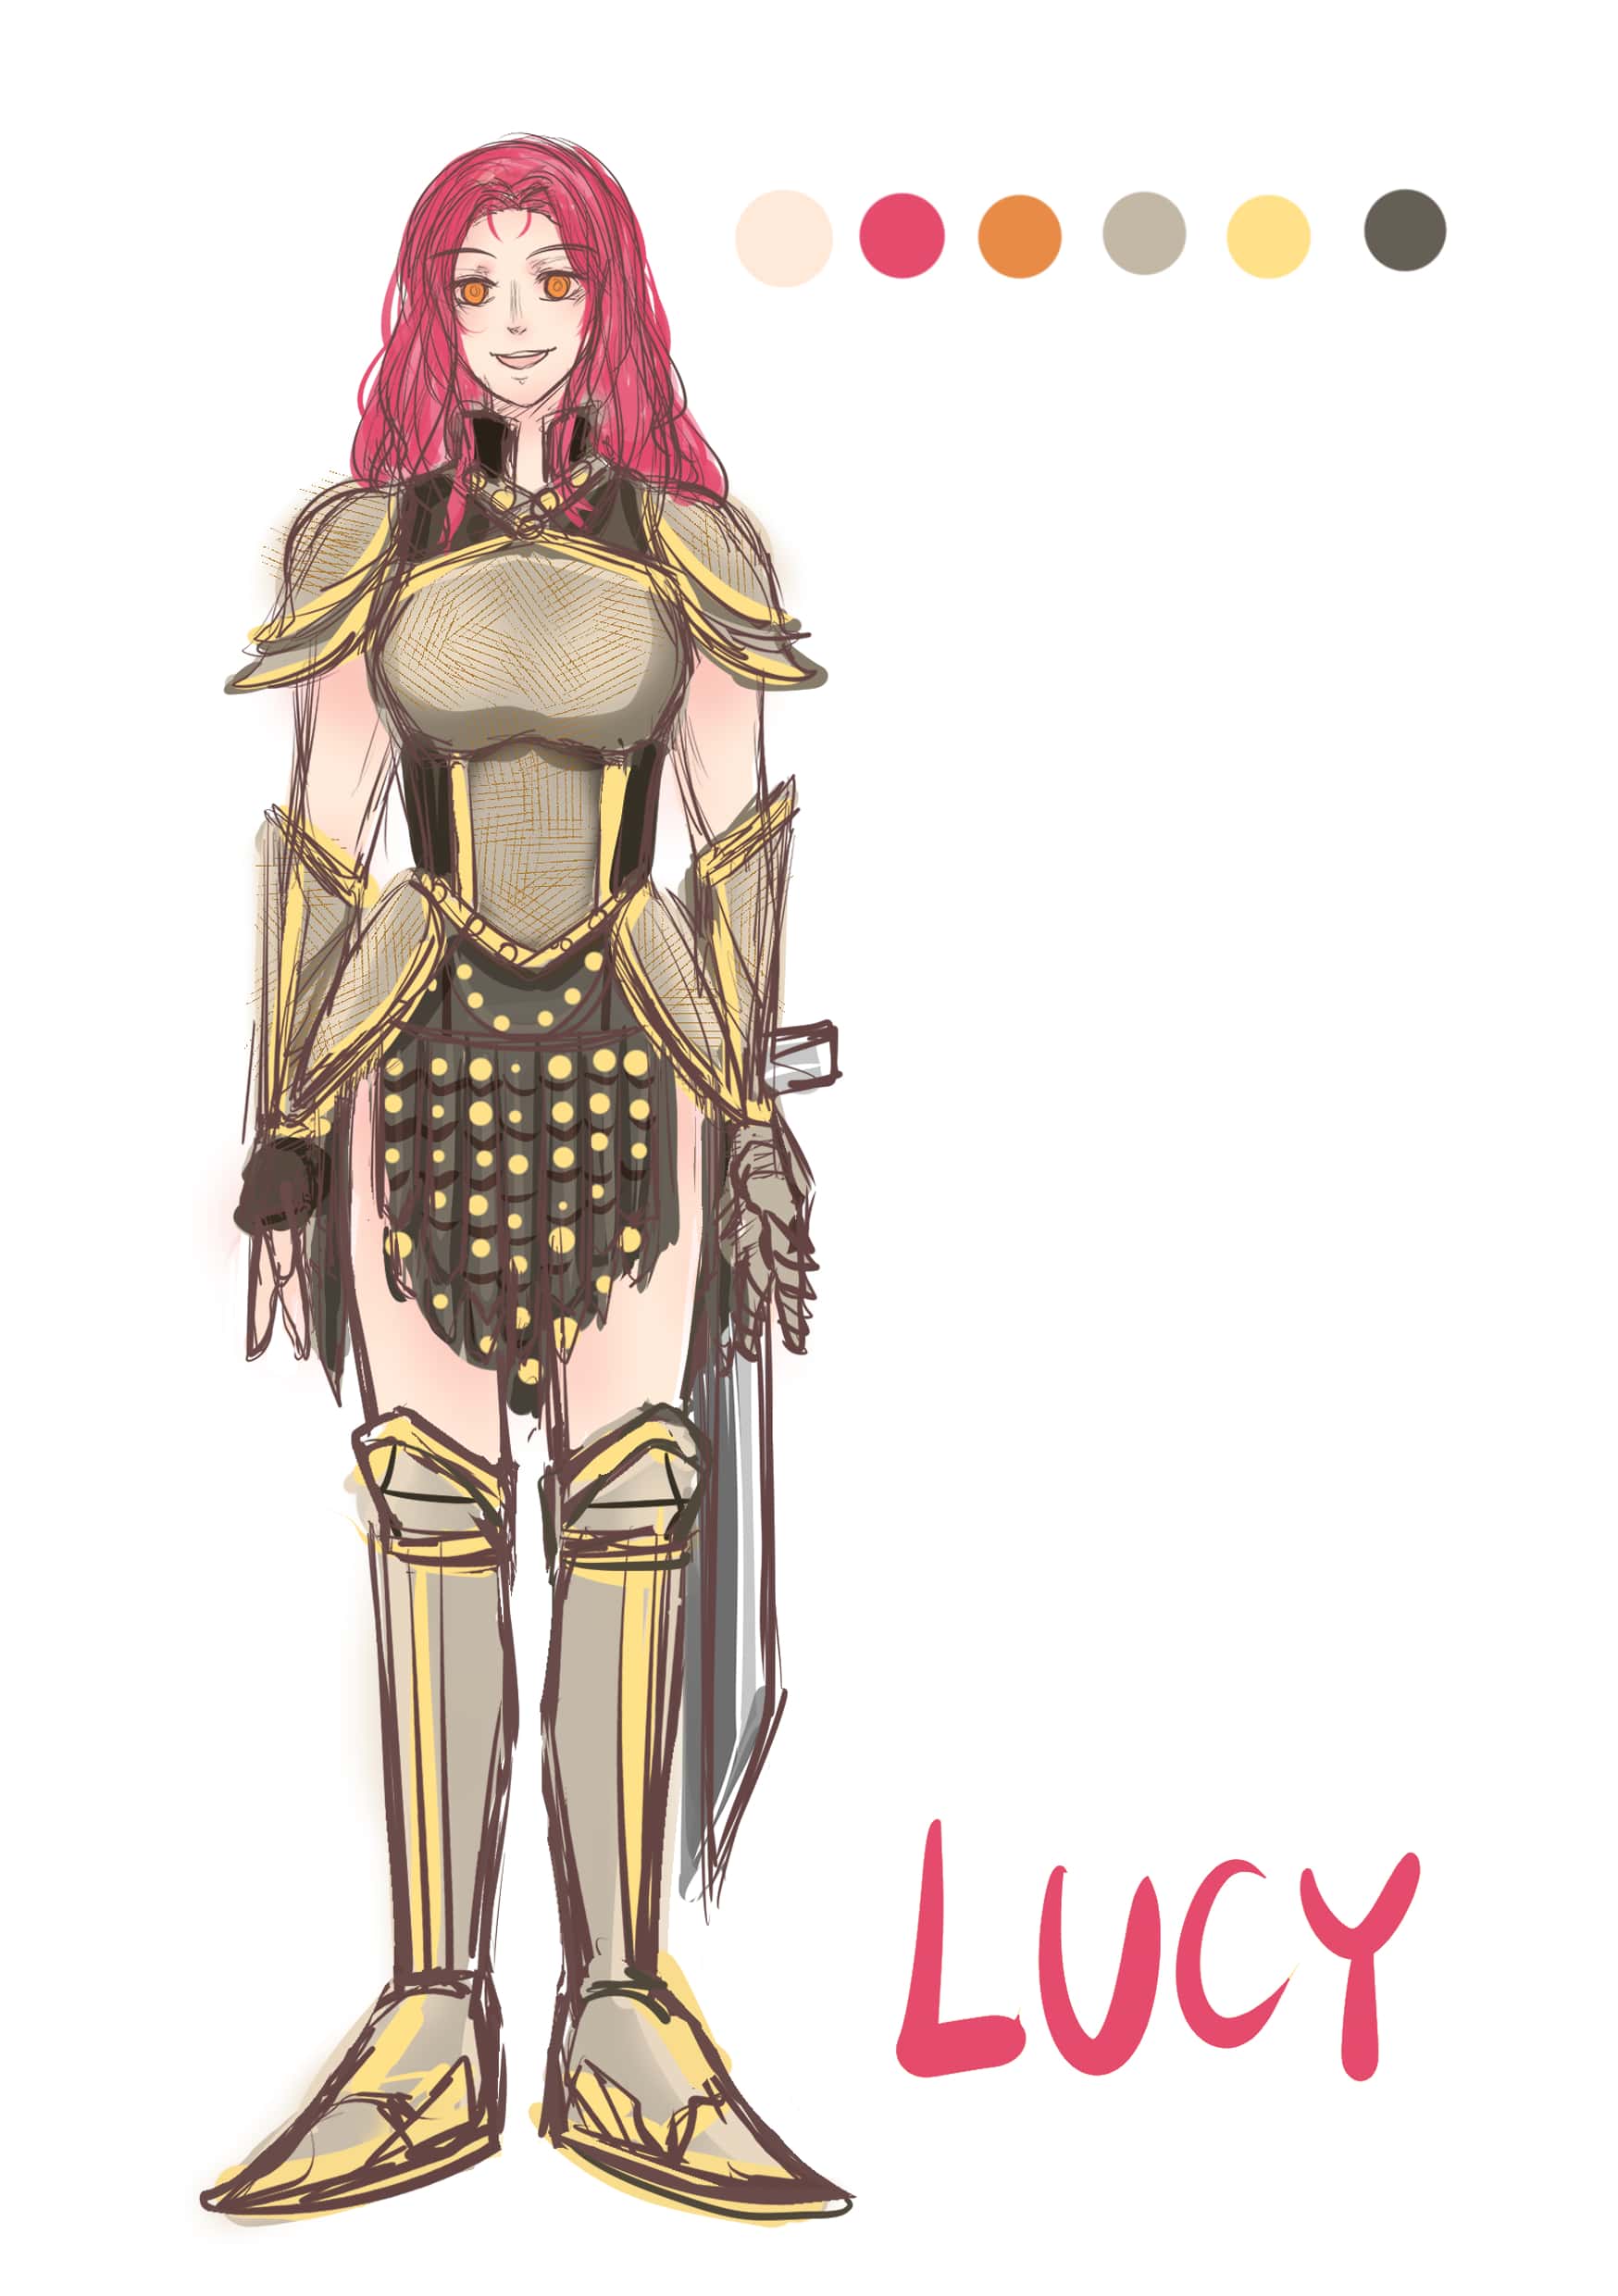 Reference pic of Lucy - art by @HaizeUqei on Twitter